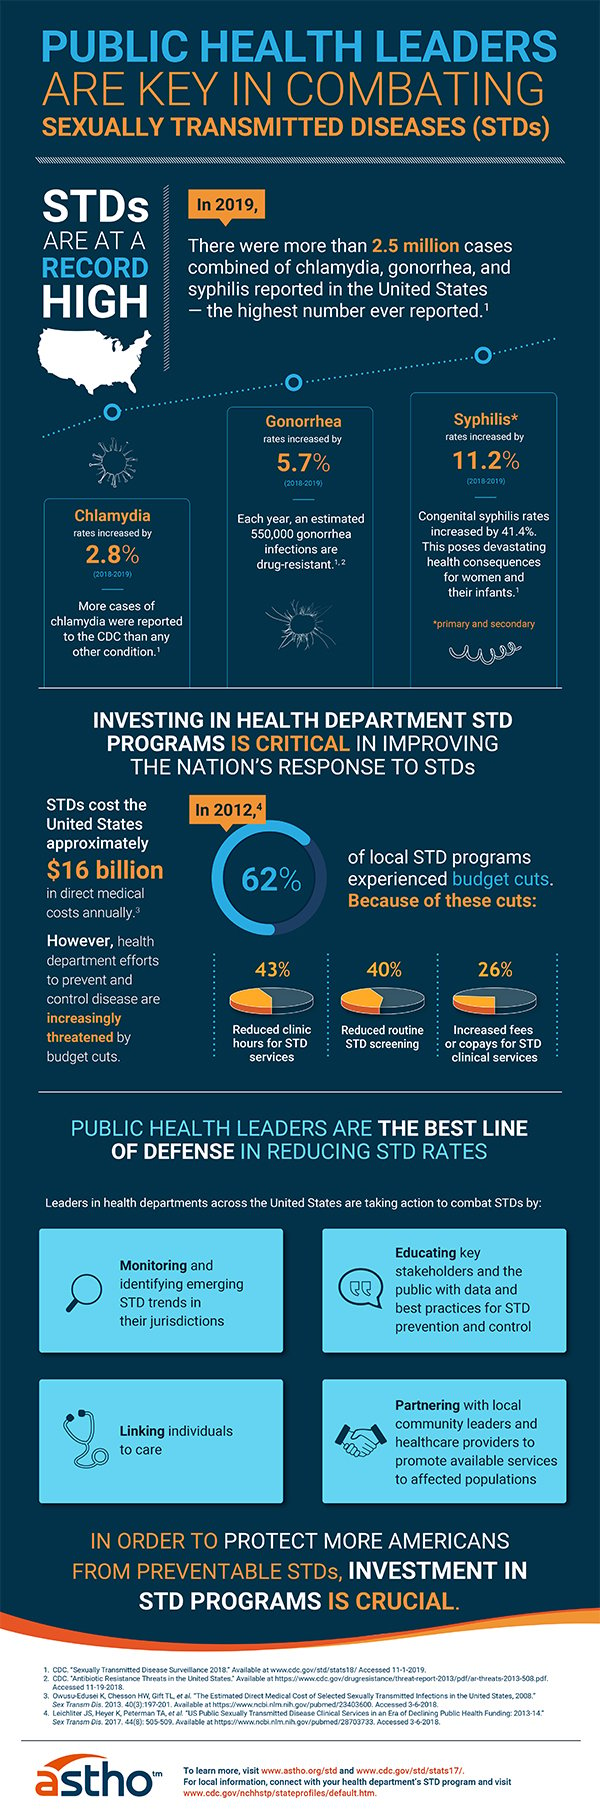 Public Health Leaders Are Key in Combating STDs Infographic